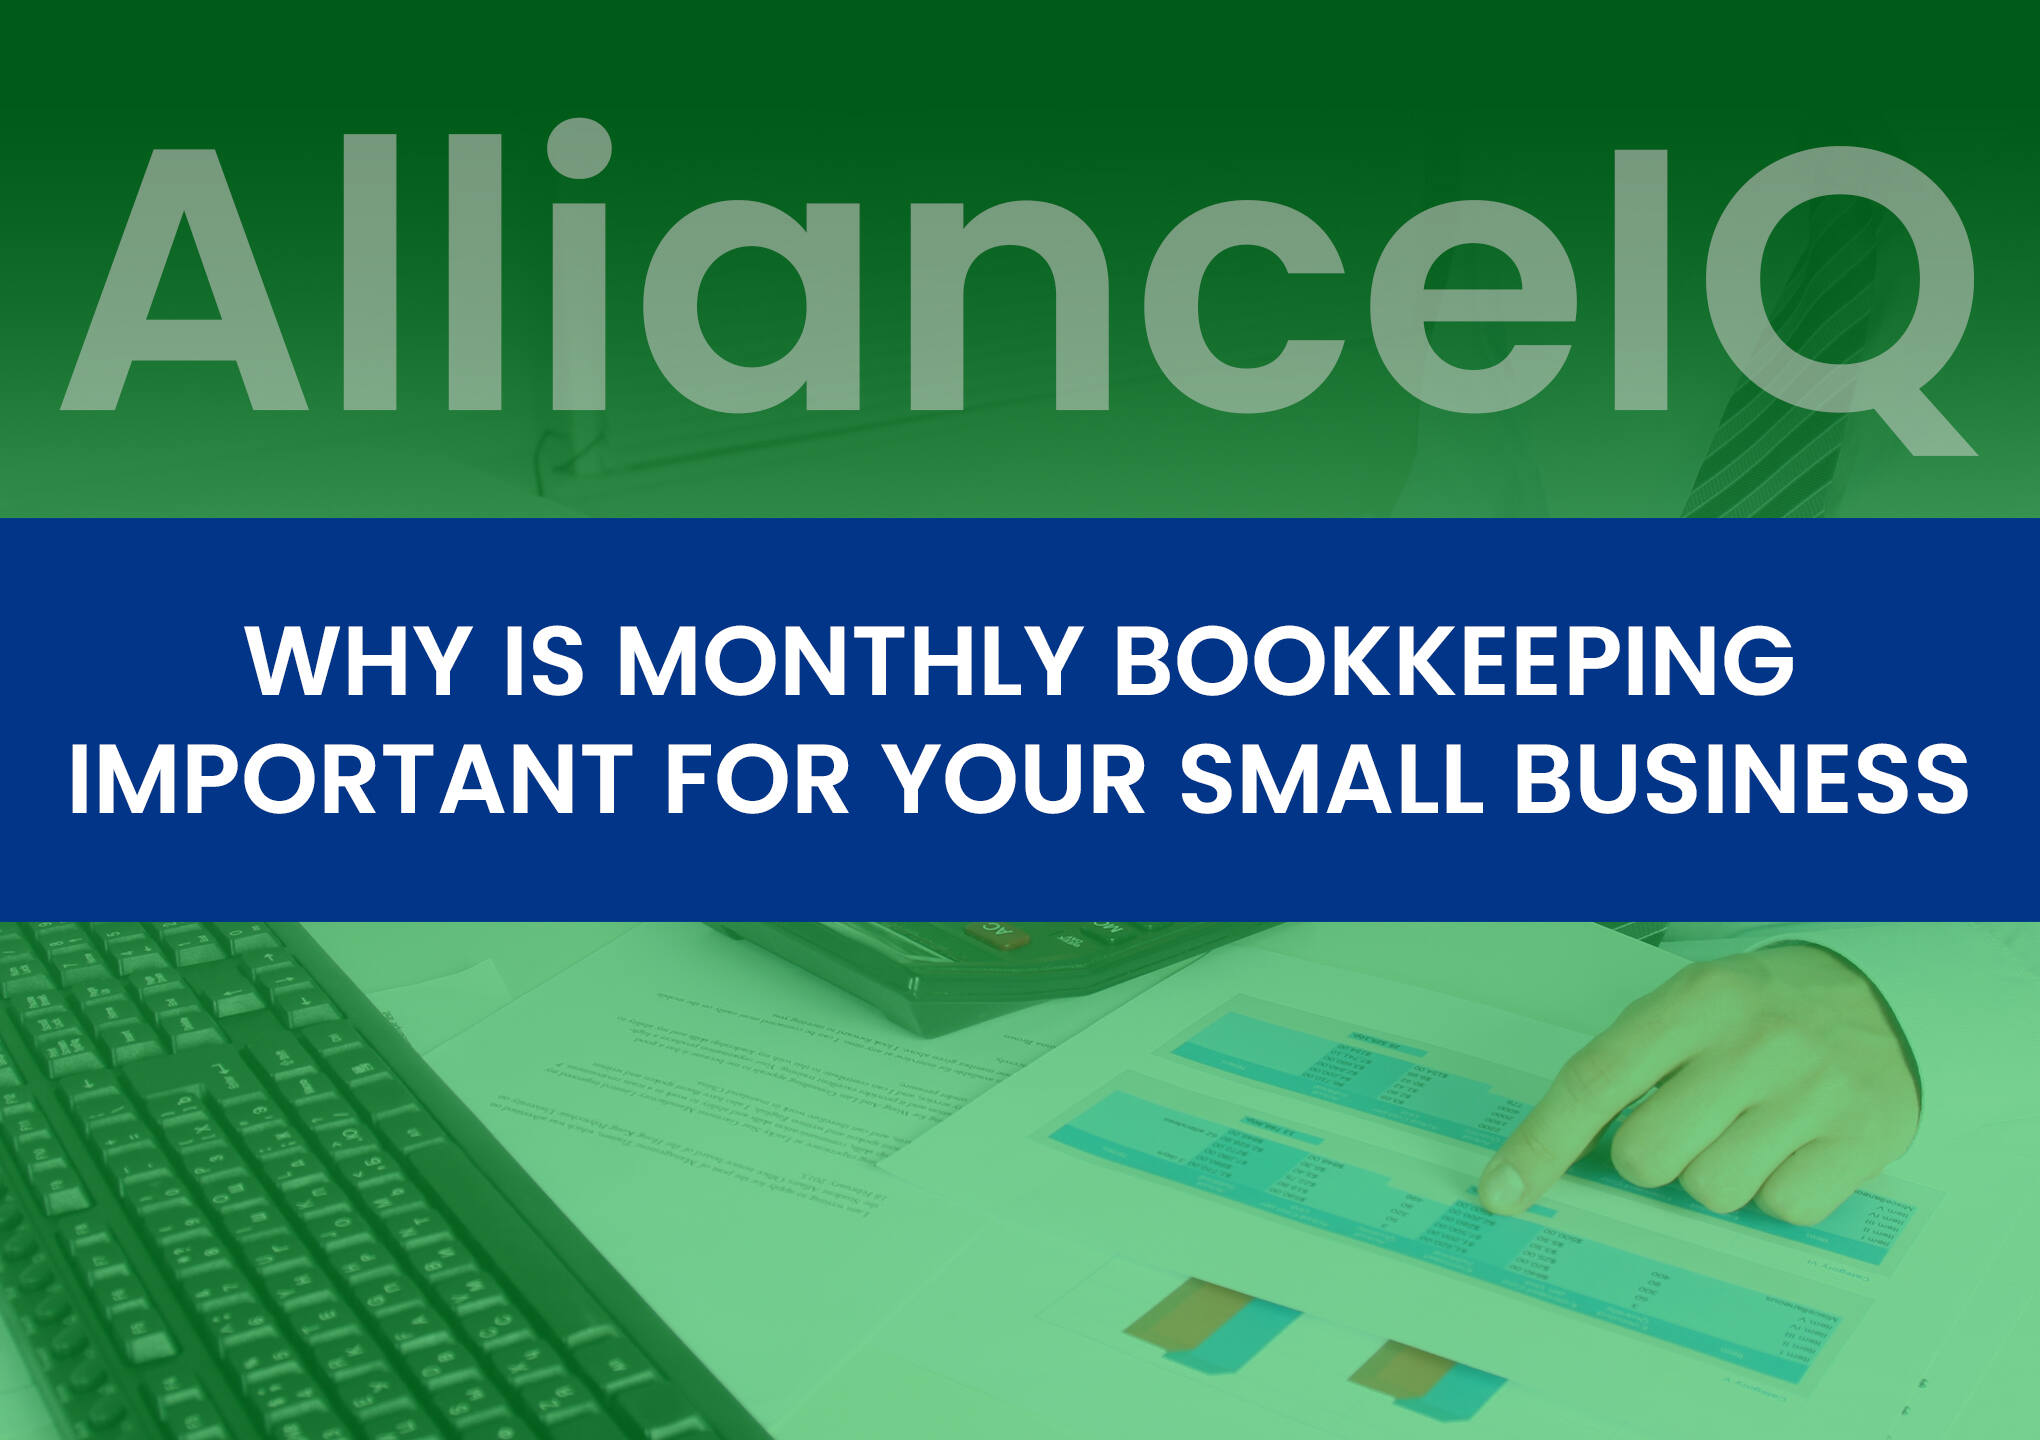 Why Is Monthly Bookkeeping Important For Your Small Business